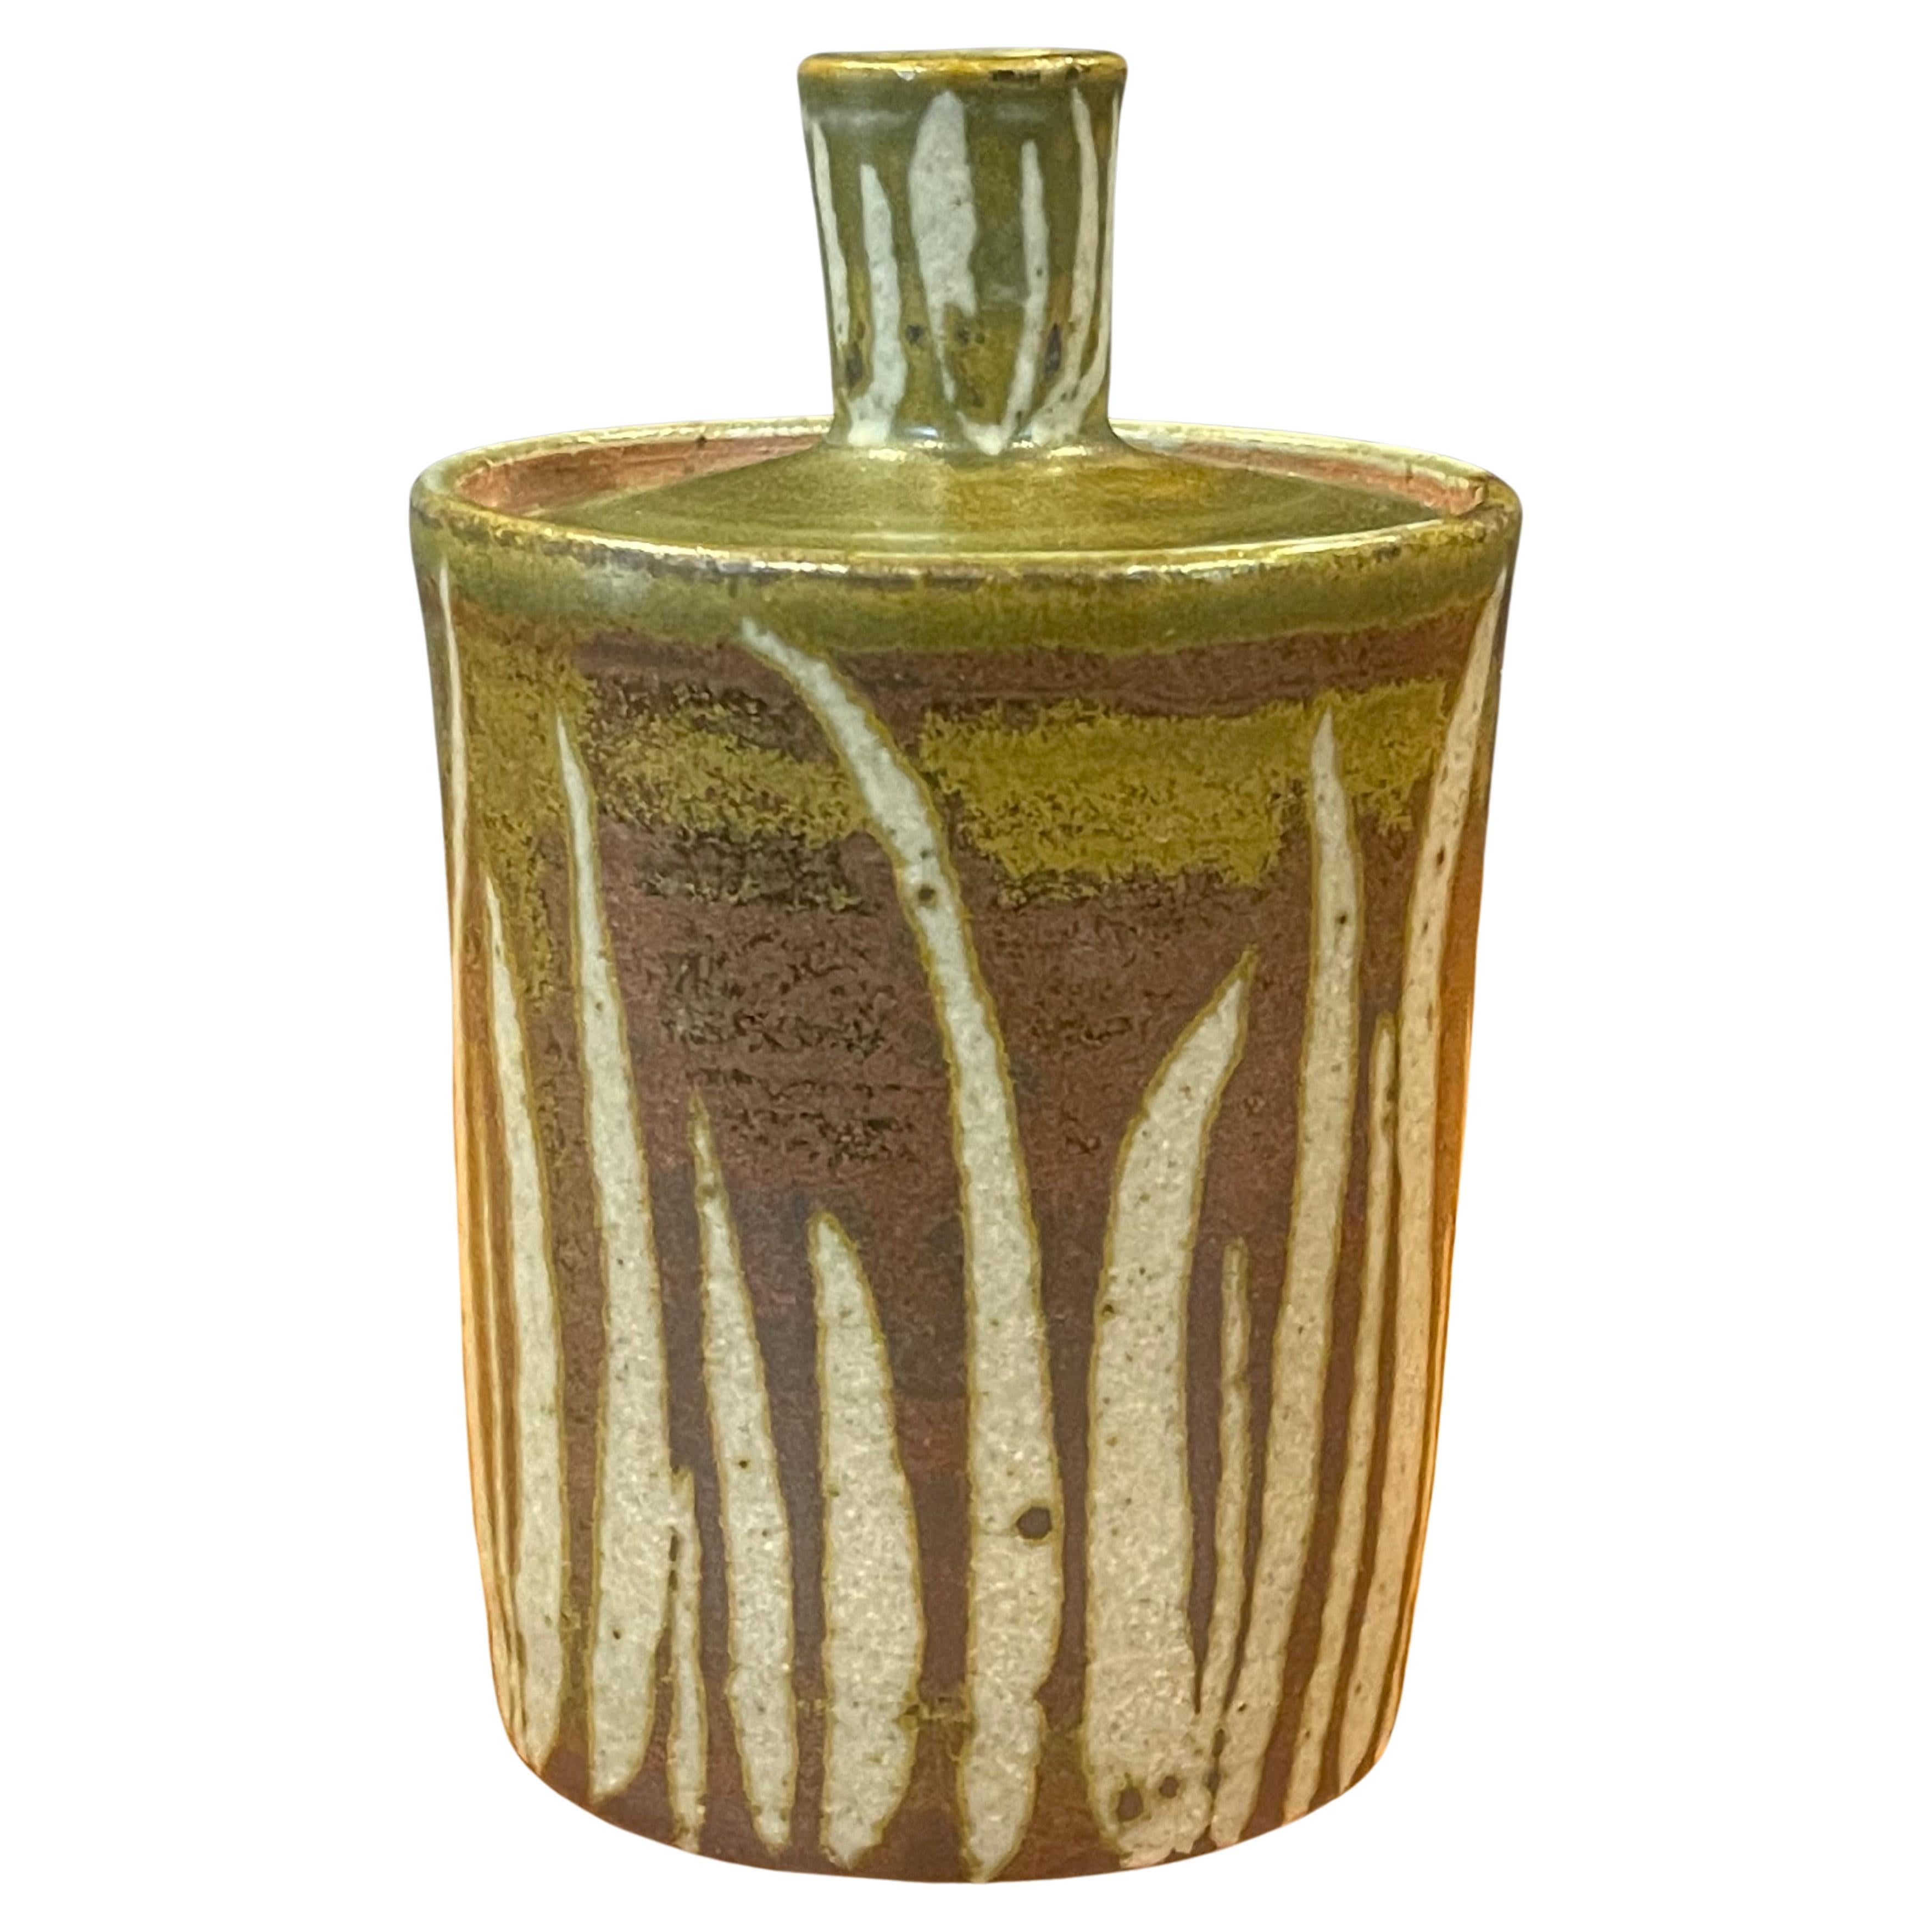 MCM stoneware studio pottery lidded jar by listed artist, Amy Donaldson, circa 1950s. This gorgeous hand finished jar has a wonderful design, texture and color. The piece measures 3.125